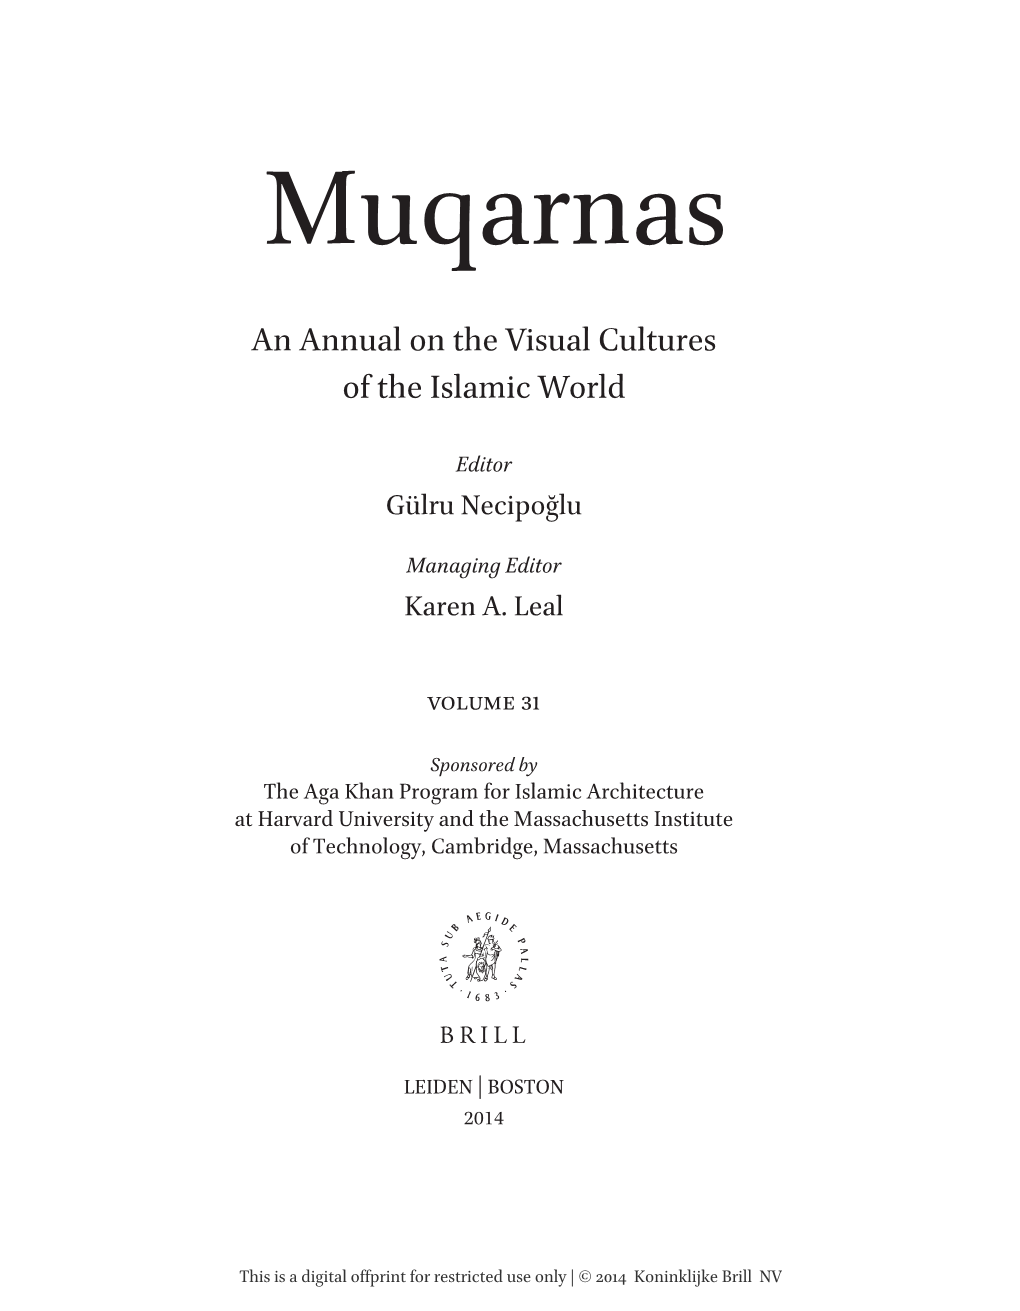 An Annual on the Visual Cultures of the Islamic World